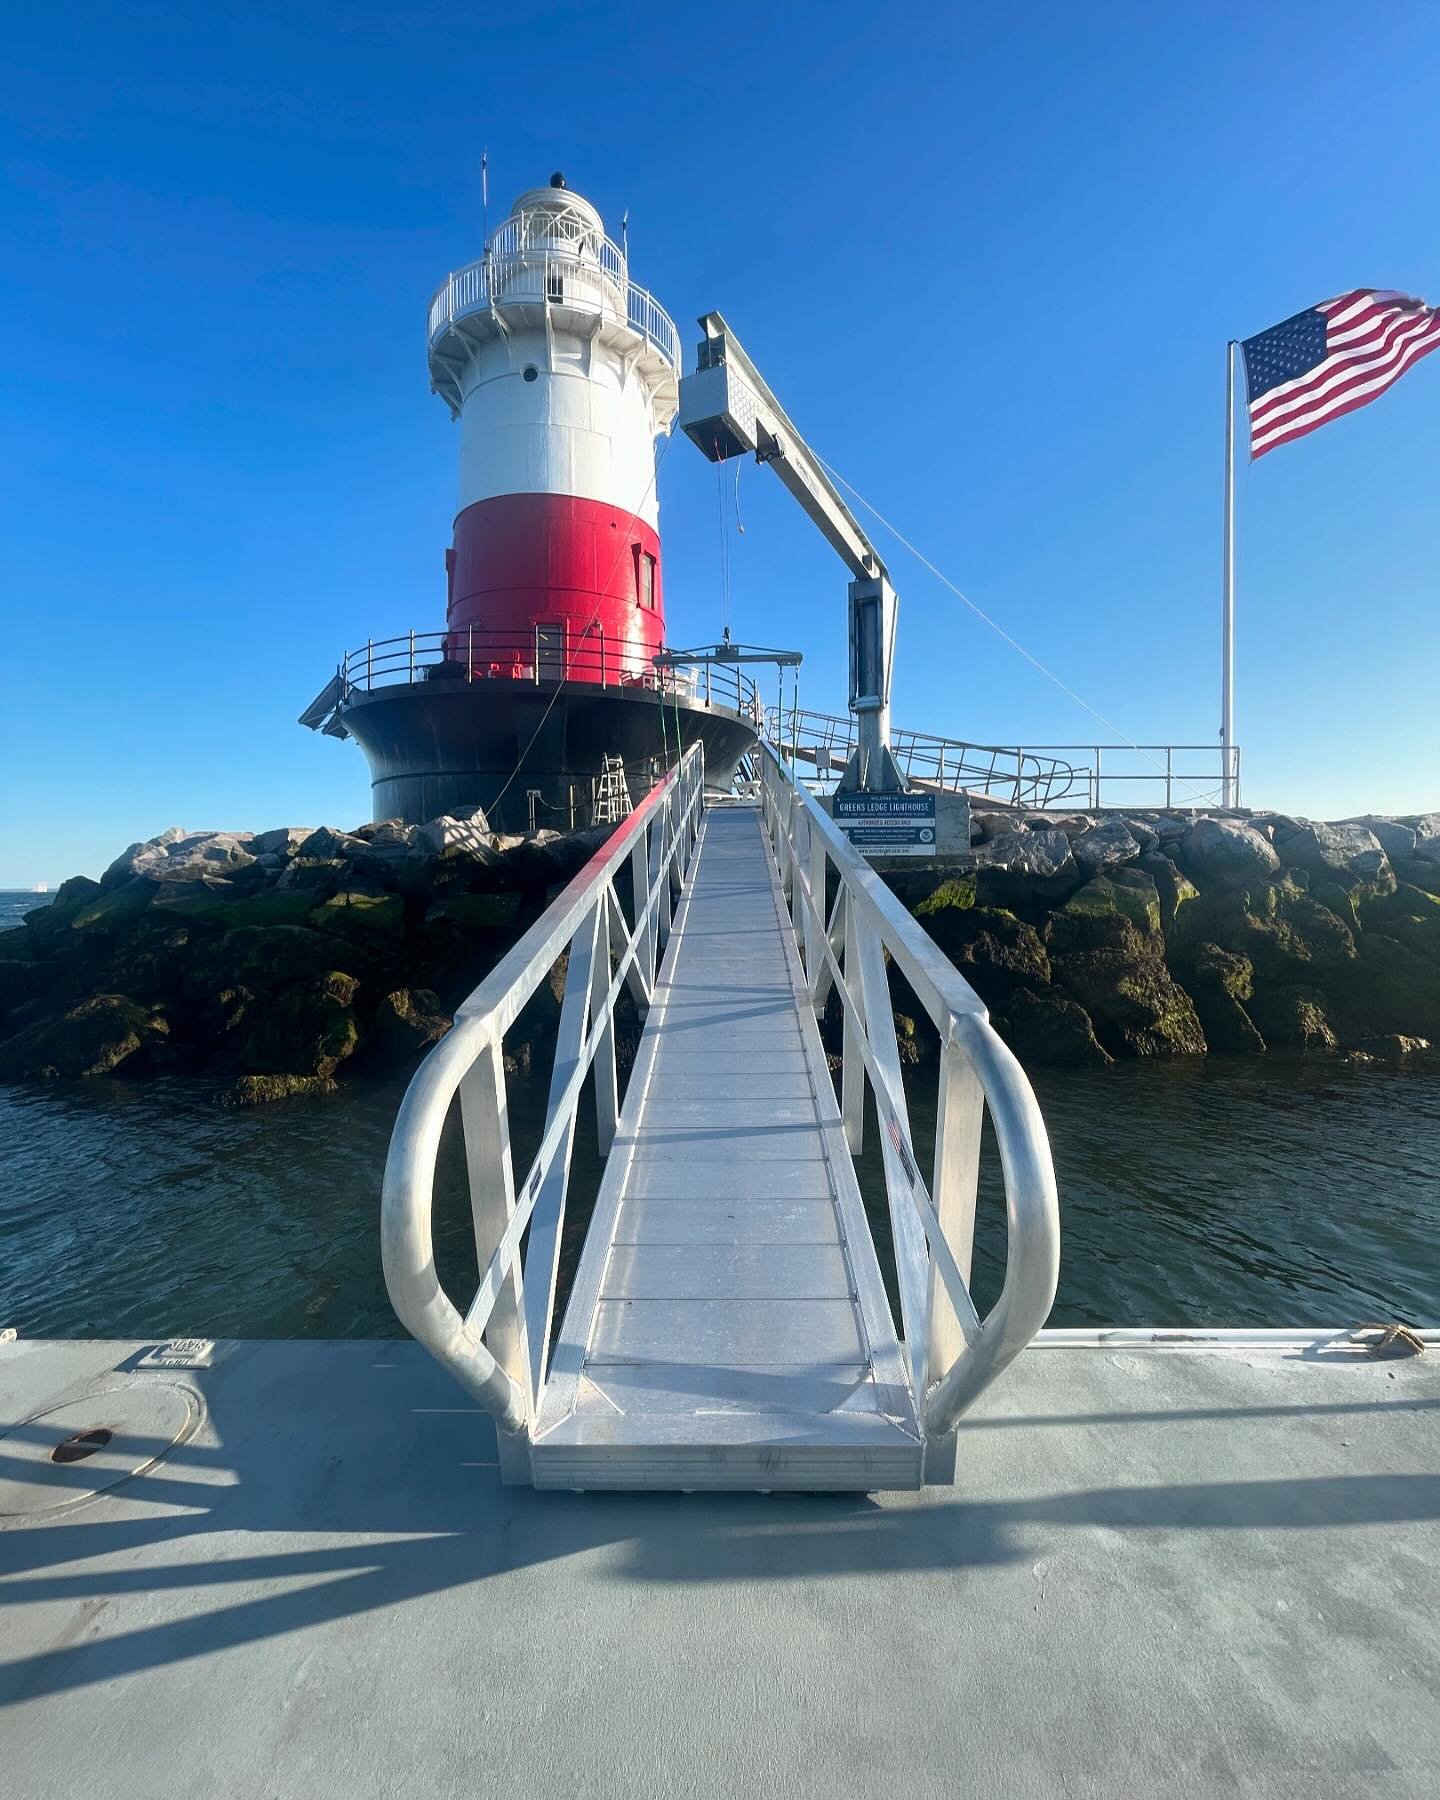 The Season Has Begun! 🏗️ Thank you to the G&amp;C Marine crew for the dock repair and installation. 

The April Nor&rsquo;Easter shredded our gangway ramp and damaged railings on the landing - threatening to postpone our season - but G&amp;C stepped